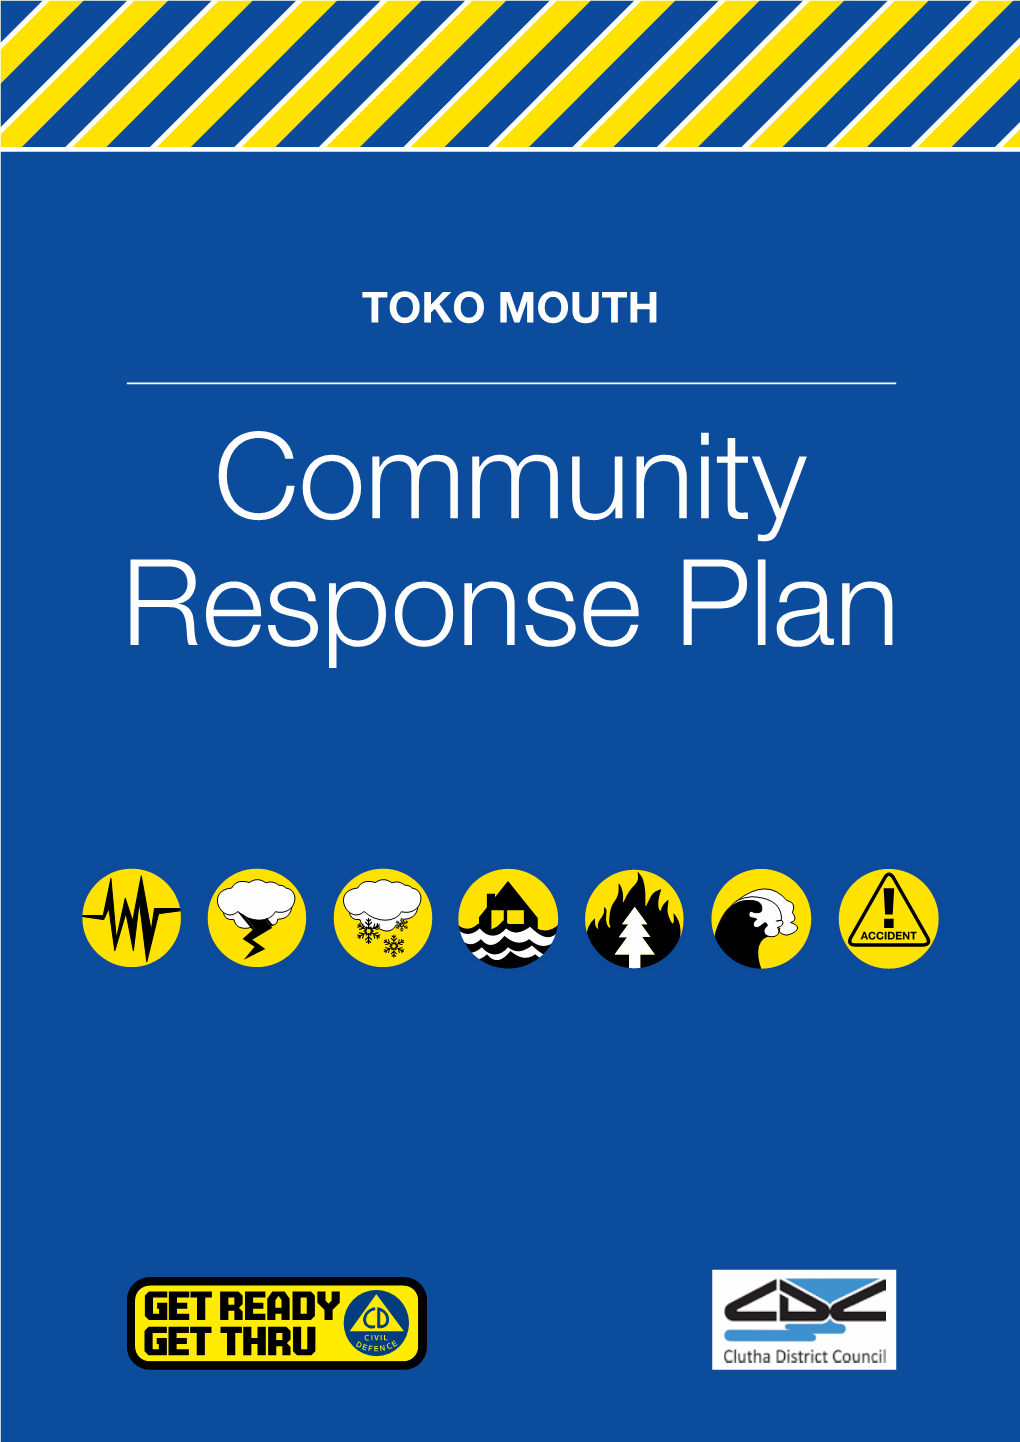 TOKO MOUTH Community Response Plan Contents